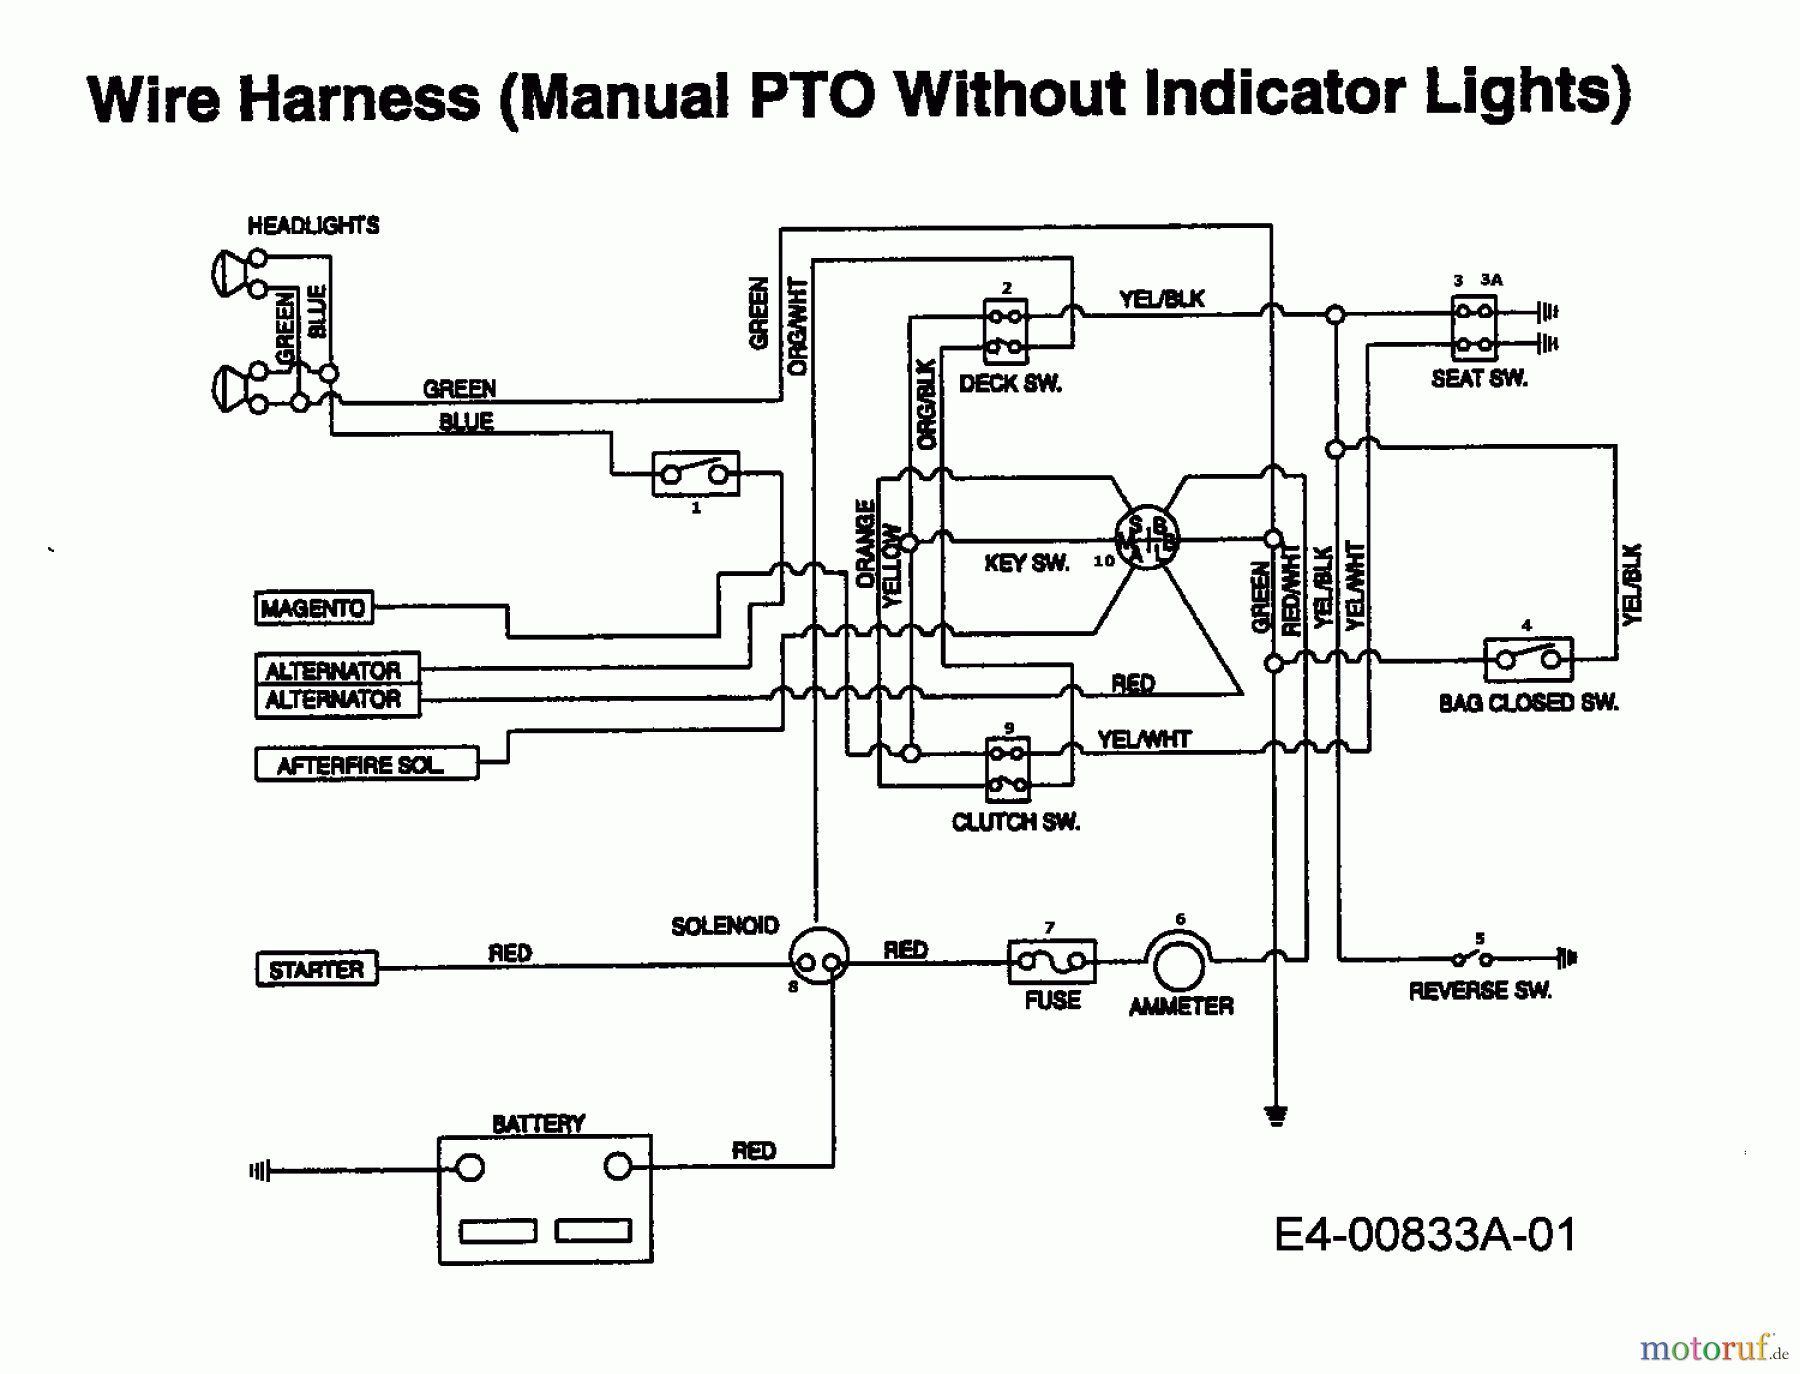  MTD Lawn tractors EH/160 13AT795N678  (1998) Wiring diagram without indicator lights